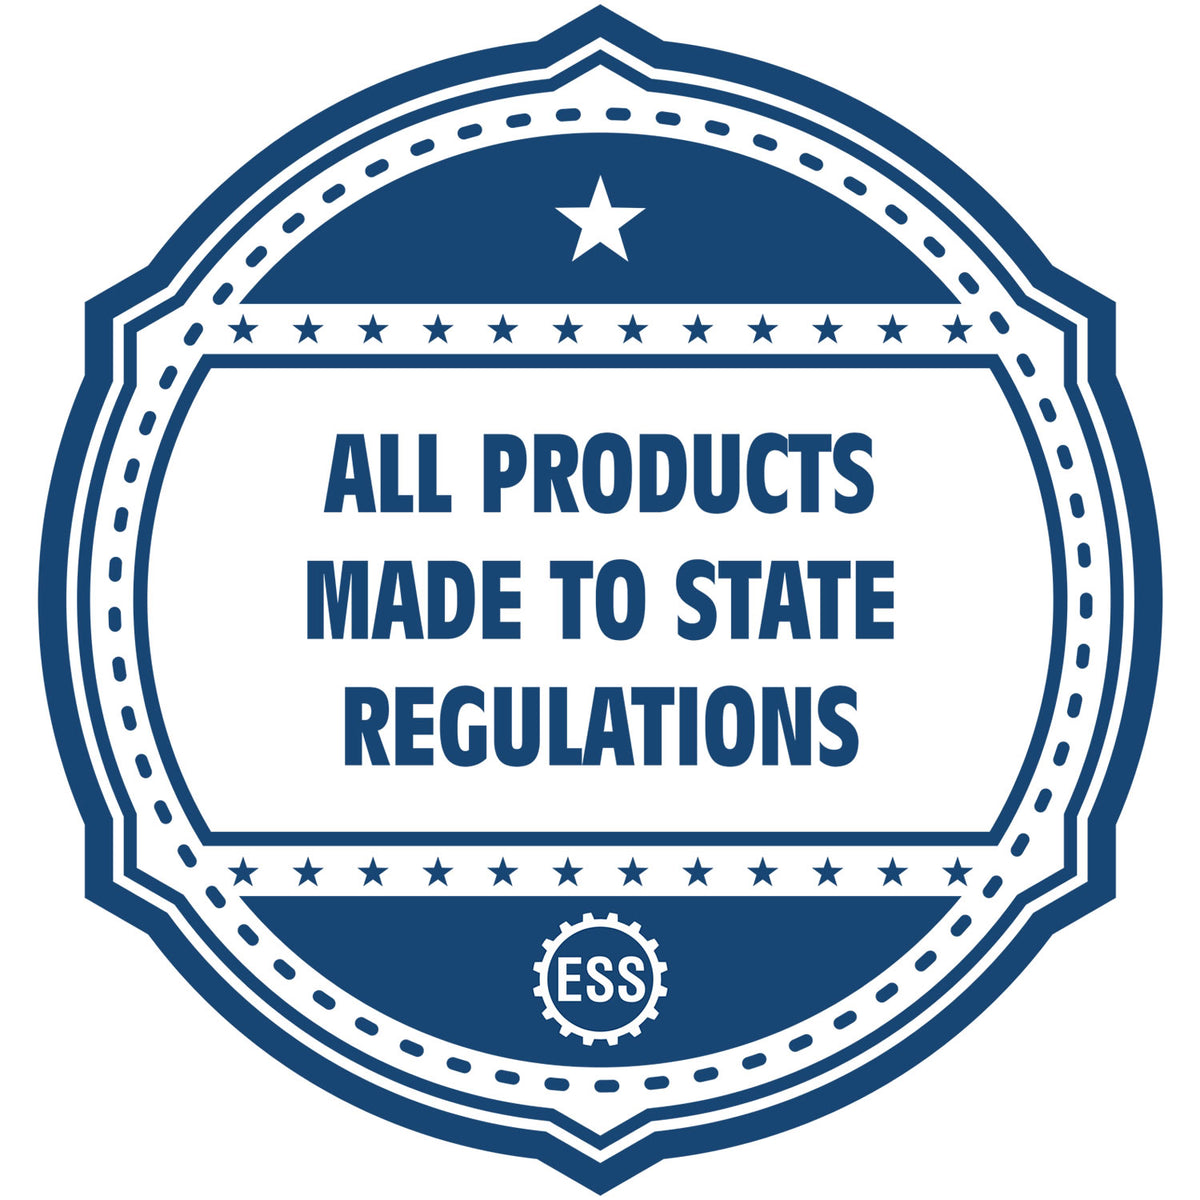 An icon or badge element for the Slim Pre-Inked New York Architect Seal Stamp showing that this product is made in compliance with state regulations.